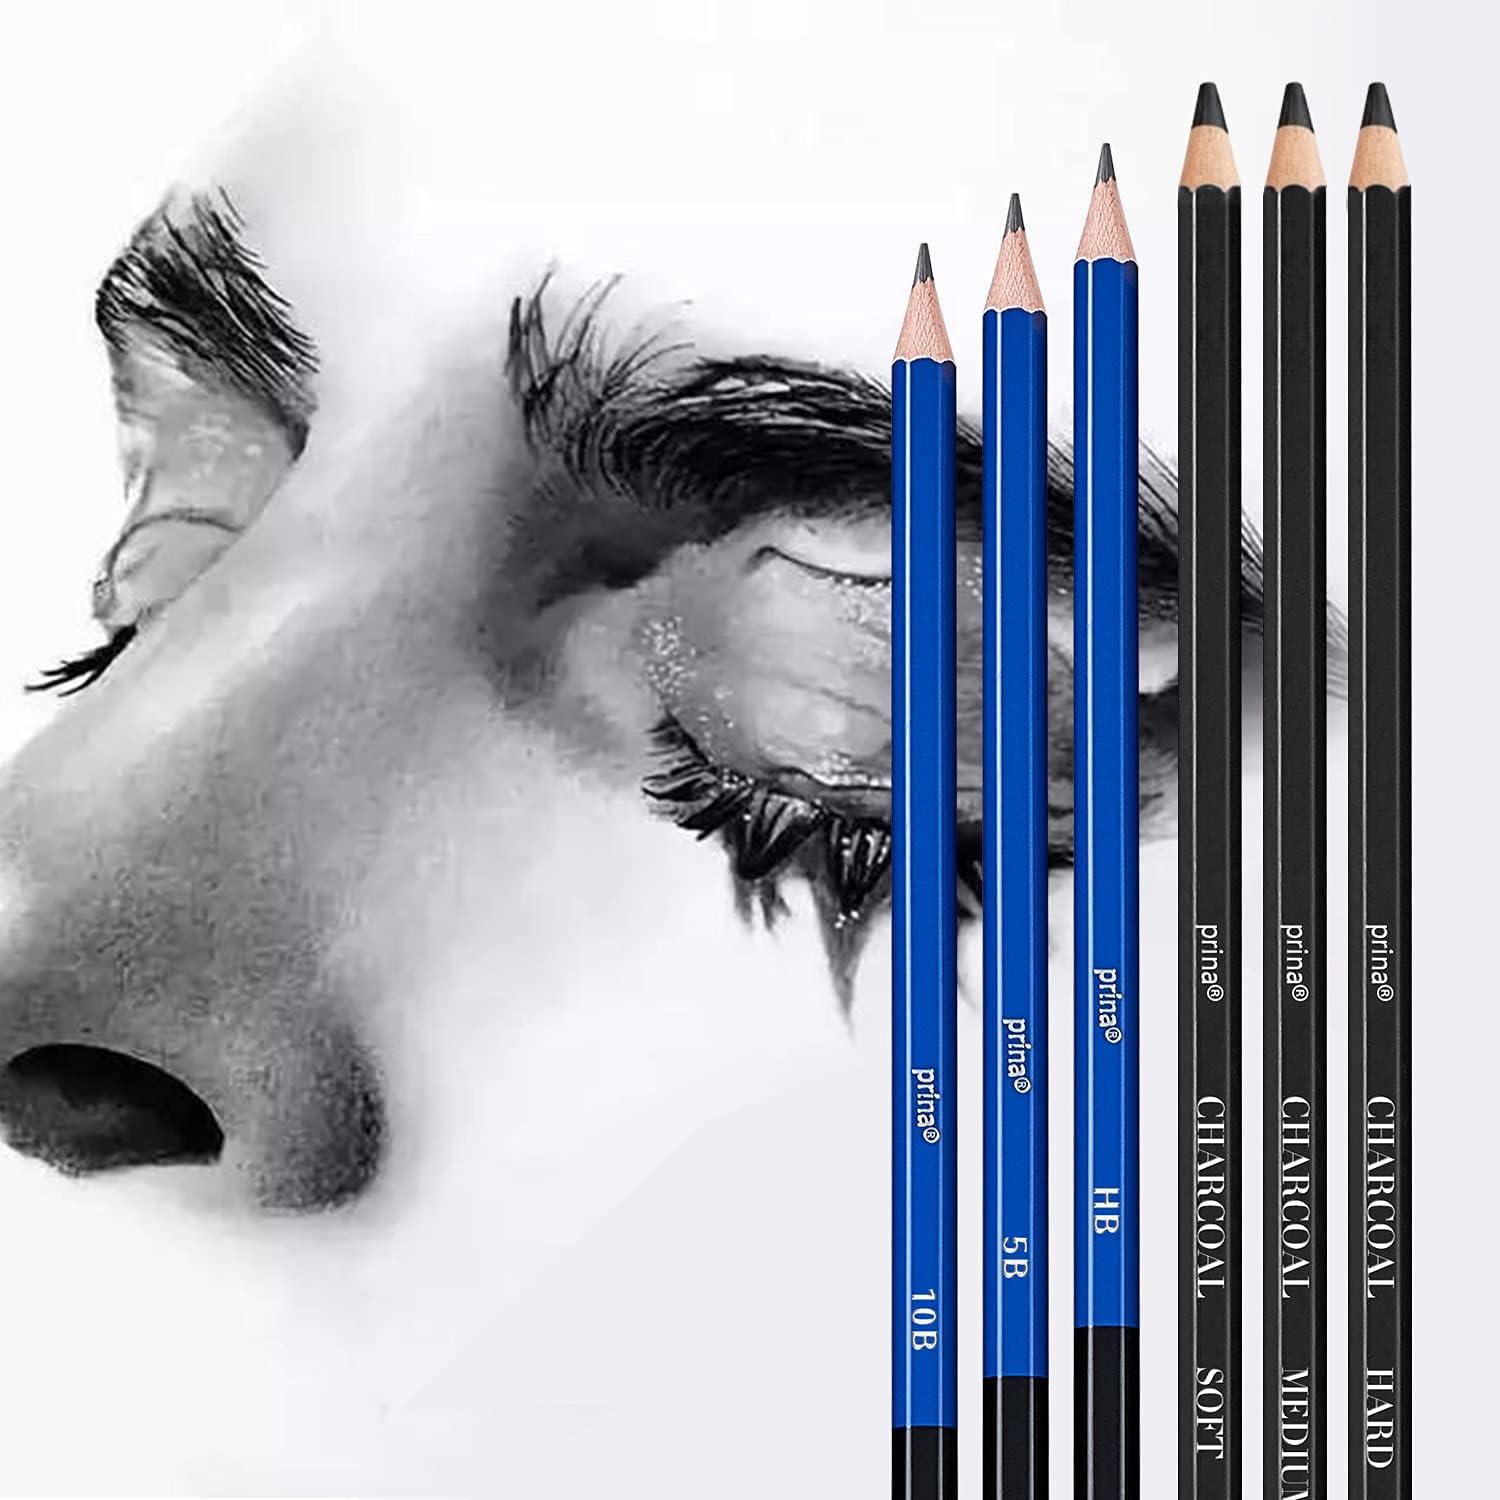 Art Supplies, Sketching & Drawing Pencils Art Kit with 2 Sketch Pads,  Professional Artists Drawing Supplies Set Includes Graphite, Charcoals,  Kneaded